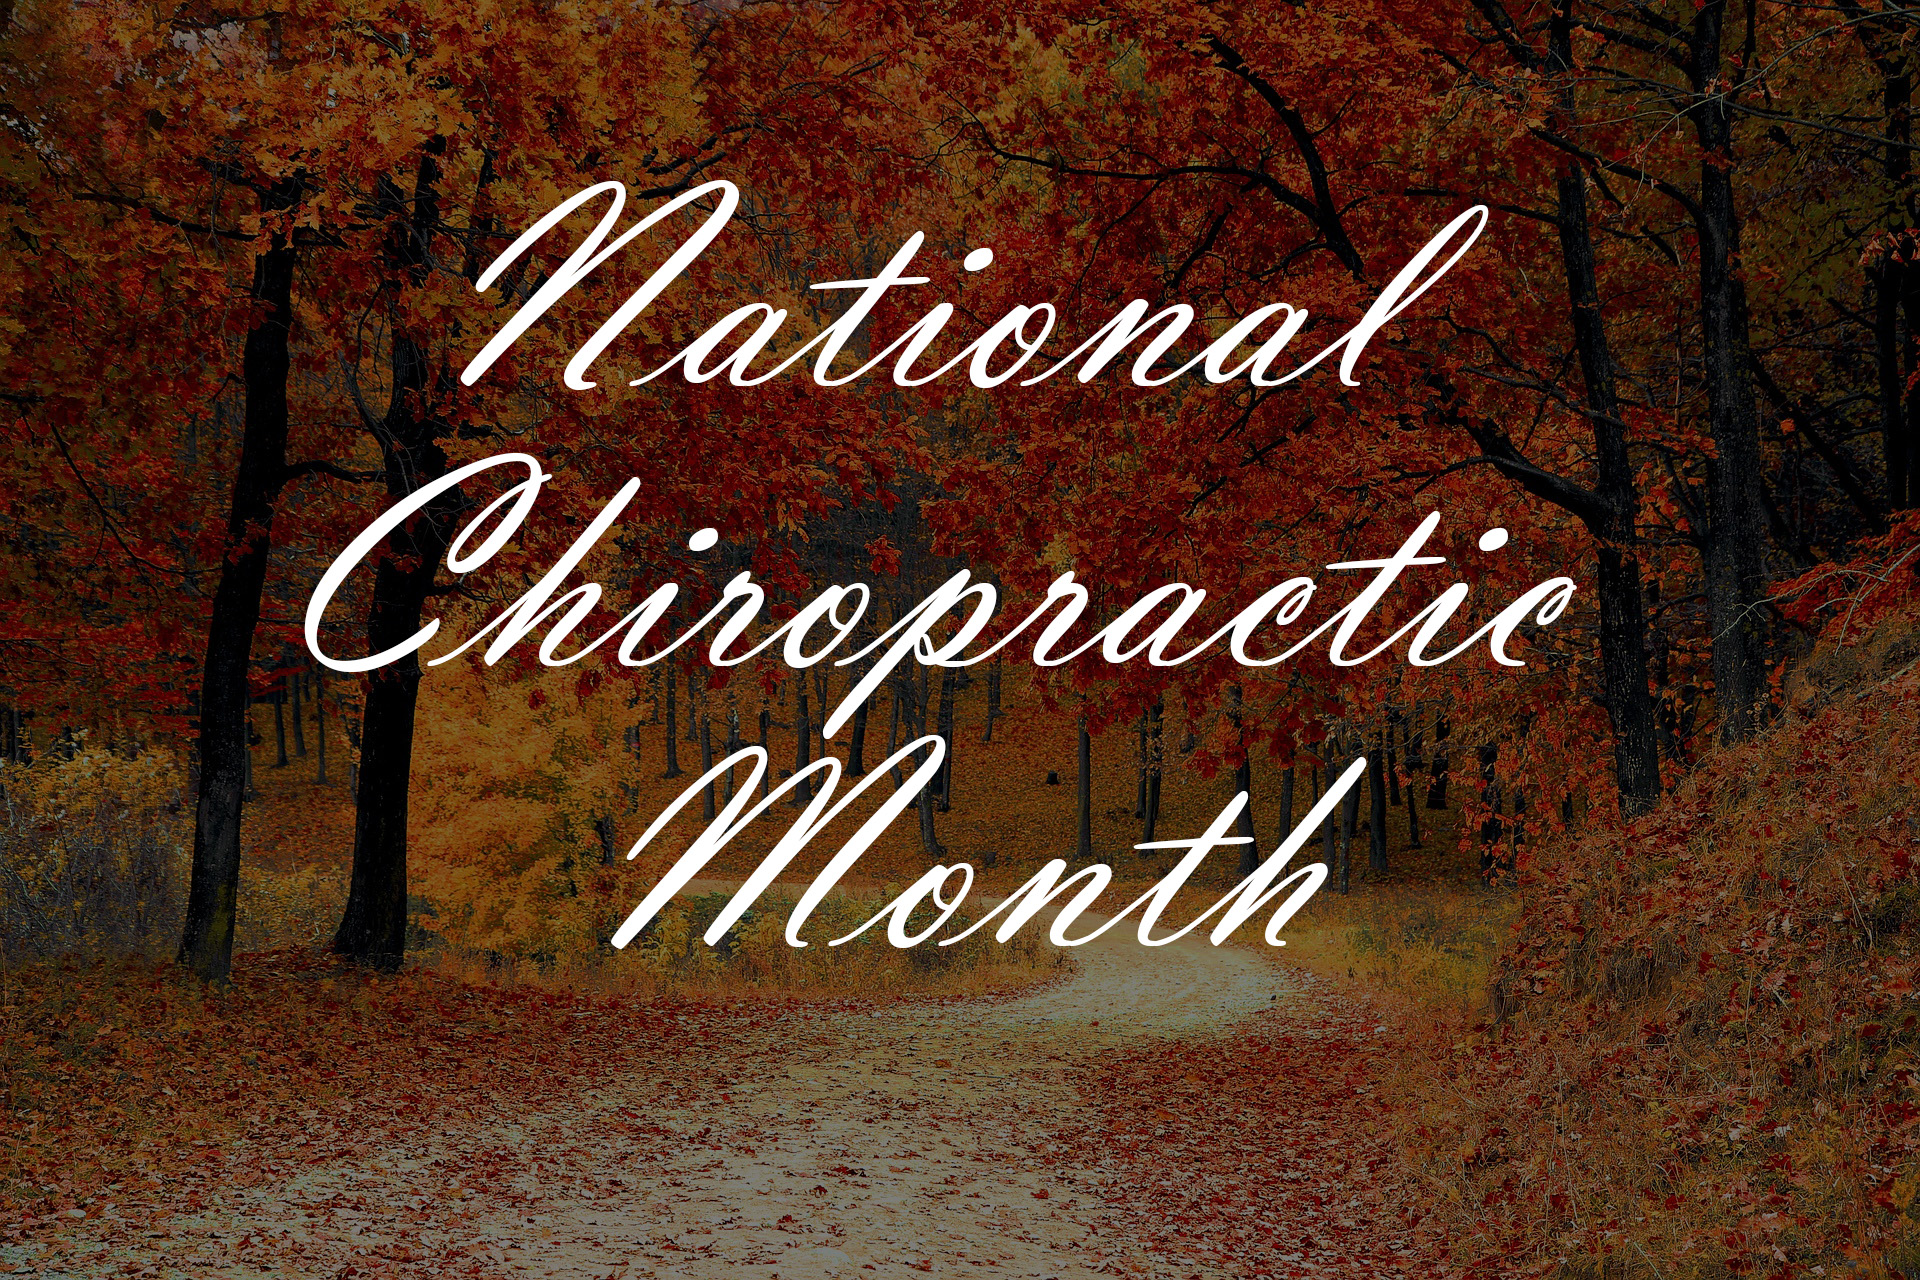 Back Pain in Focus During National Chiropractic Month